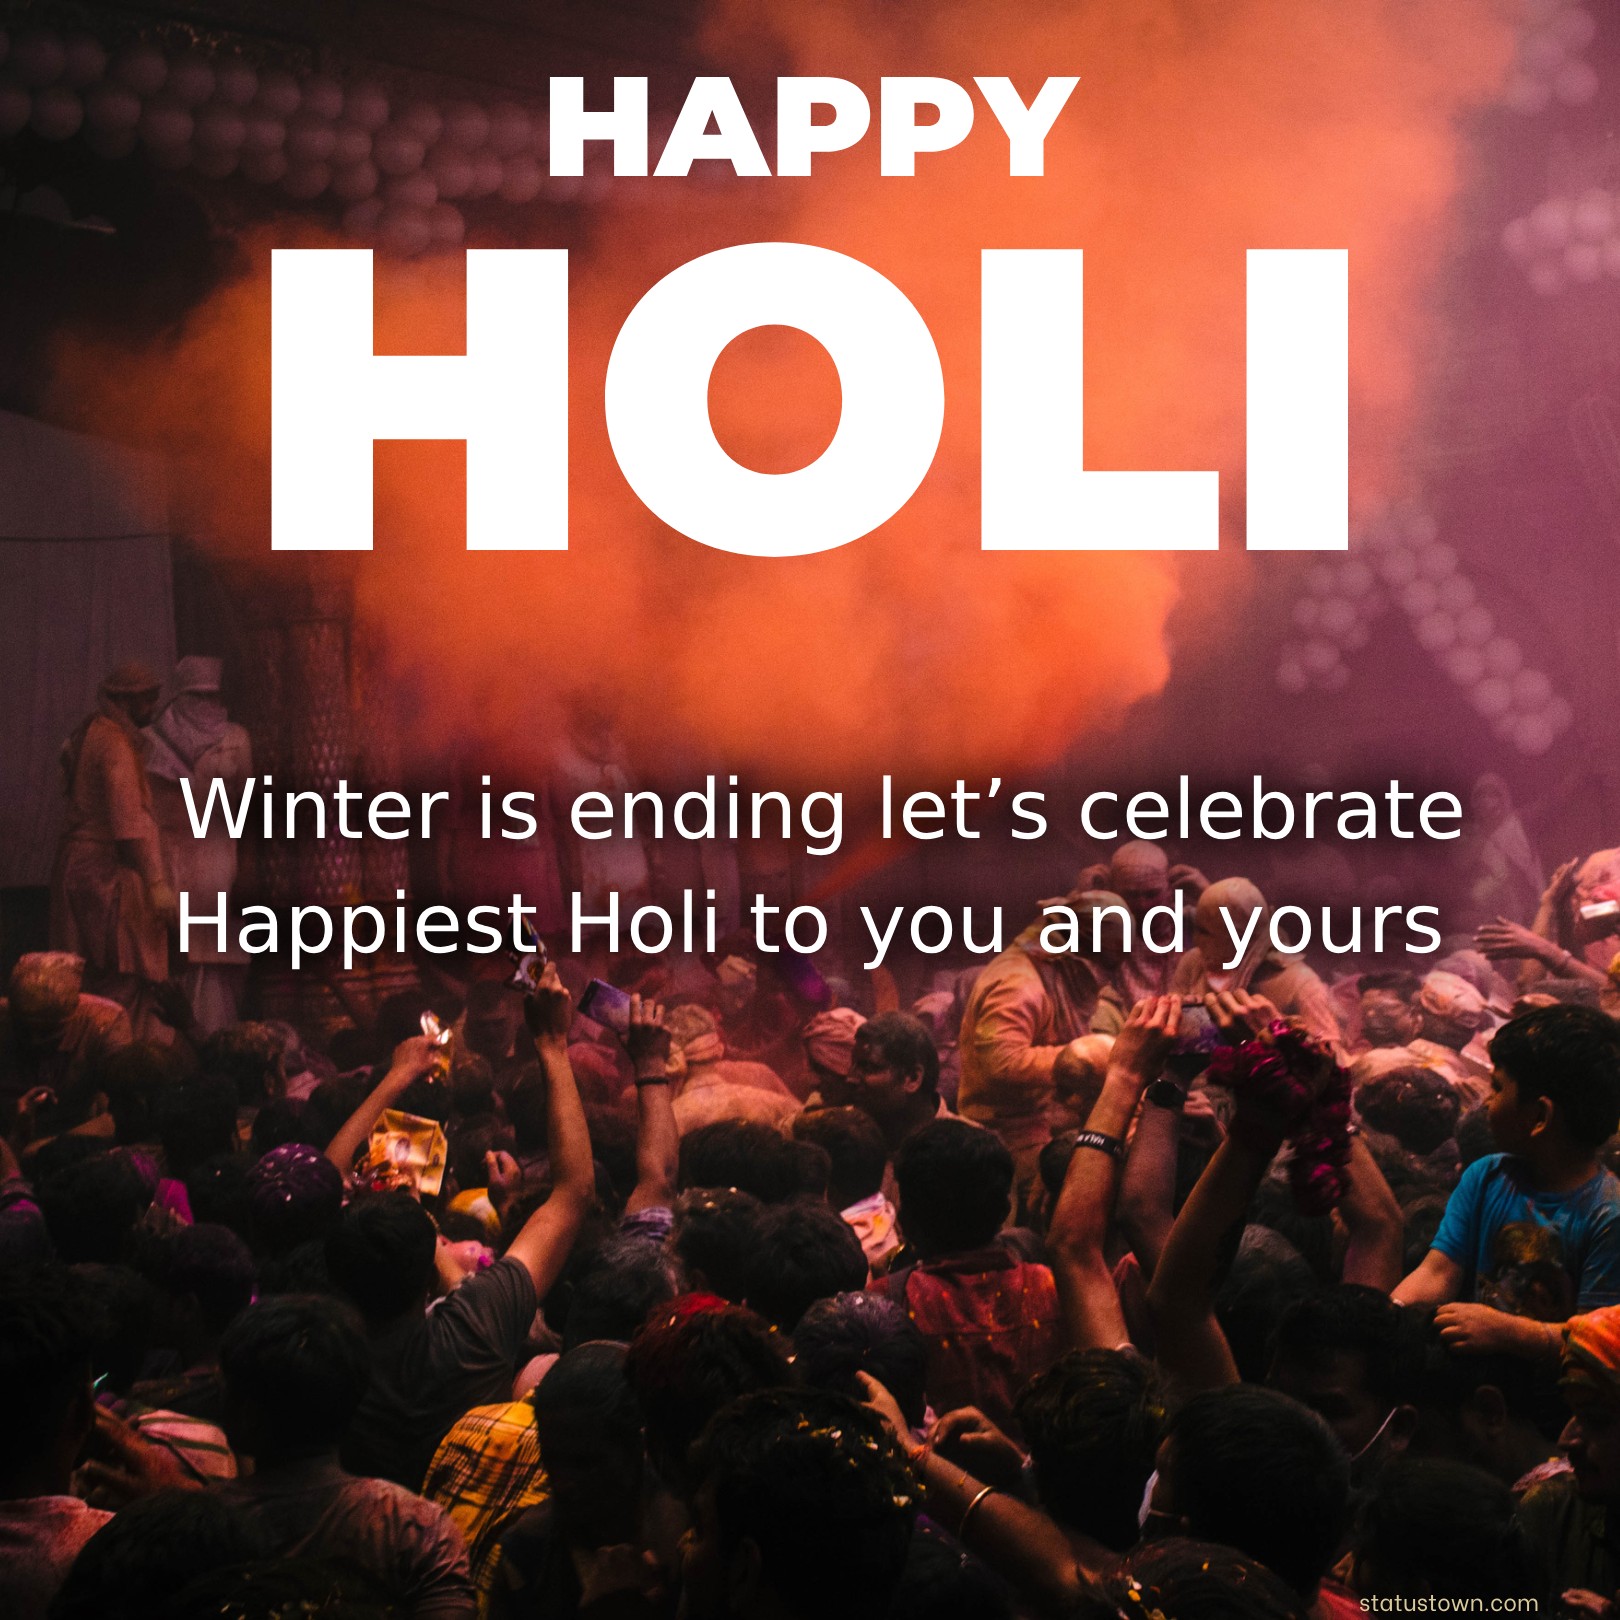 Winter is ending, let’s celebrate! Happiest Holi to you and yours. - Holi Wishes wishes, messages, and status